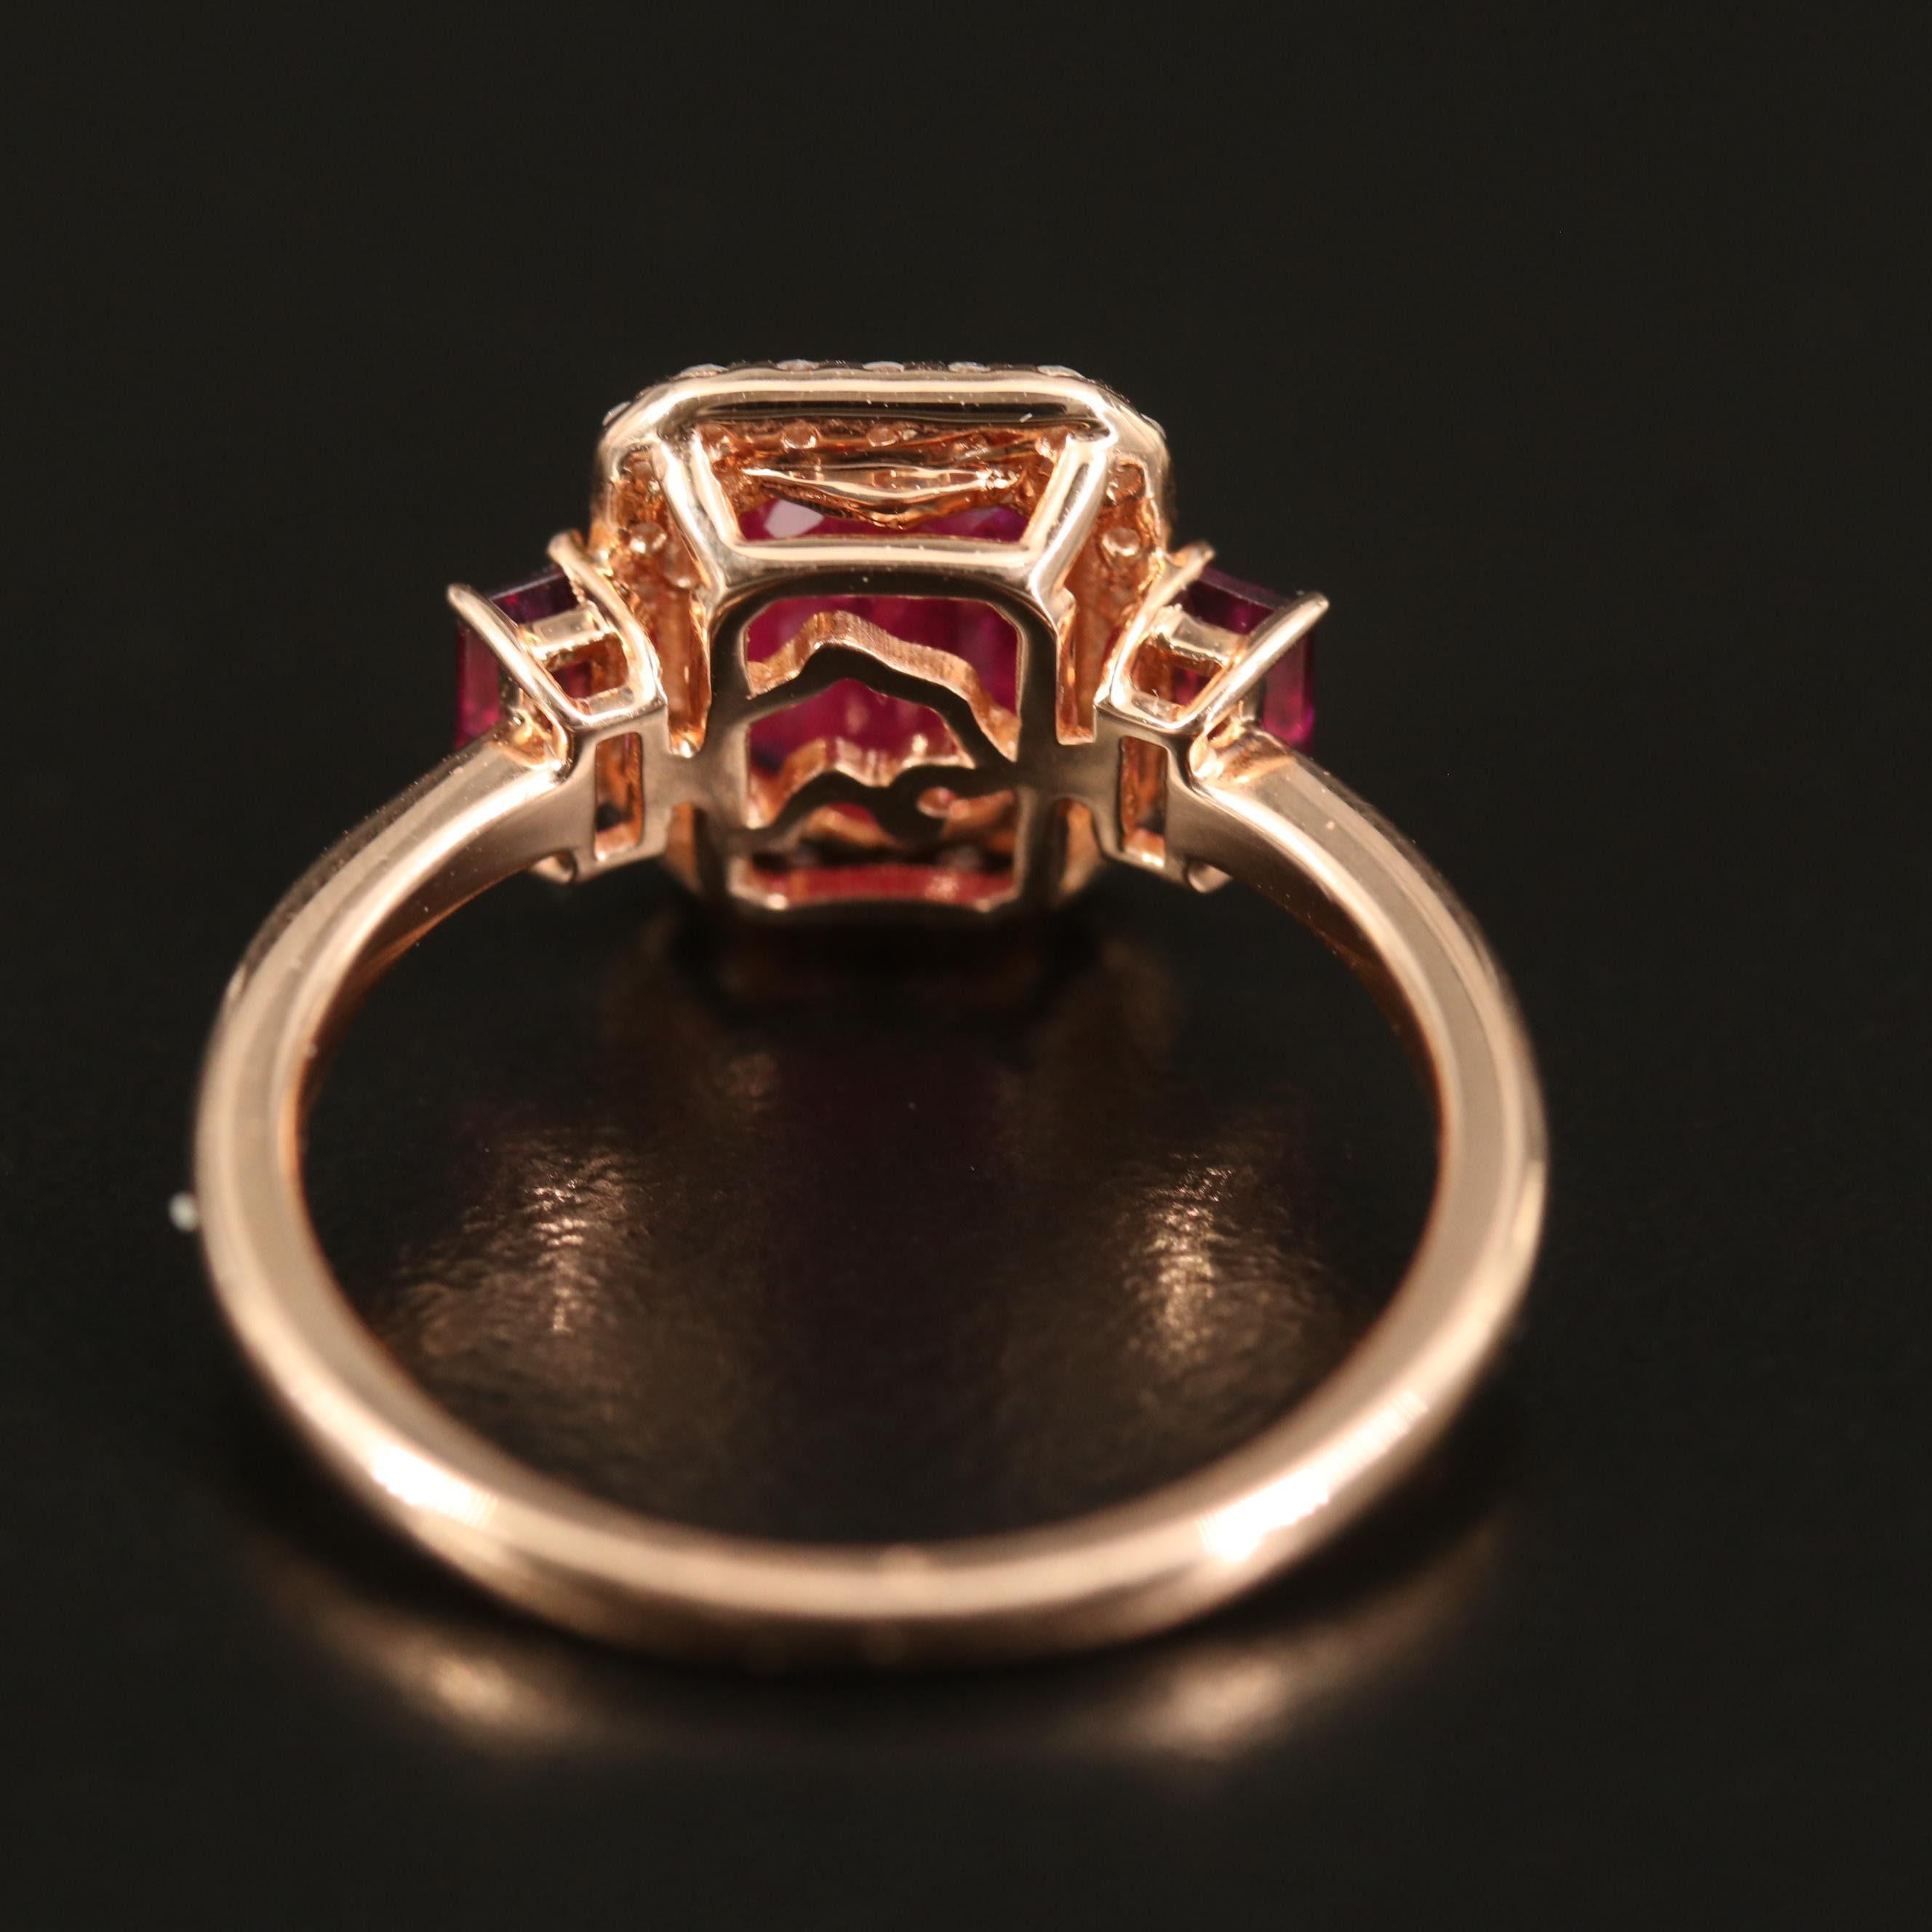 For Sale:  18K Gold 1.72 Carat Natural Ruby Diamond Antique Art Deco Style Engagement Ring 6